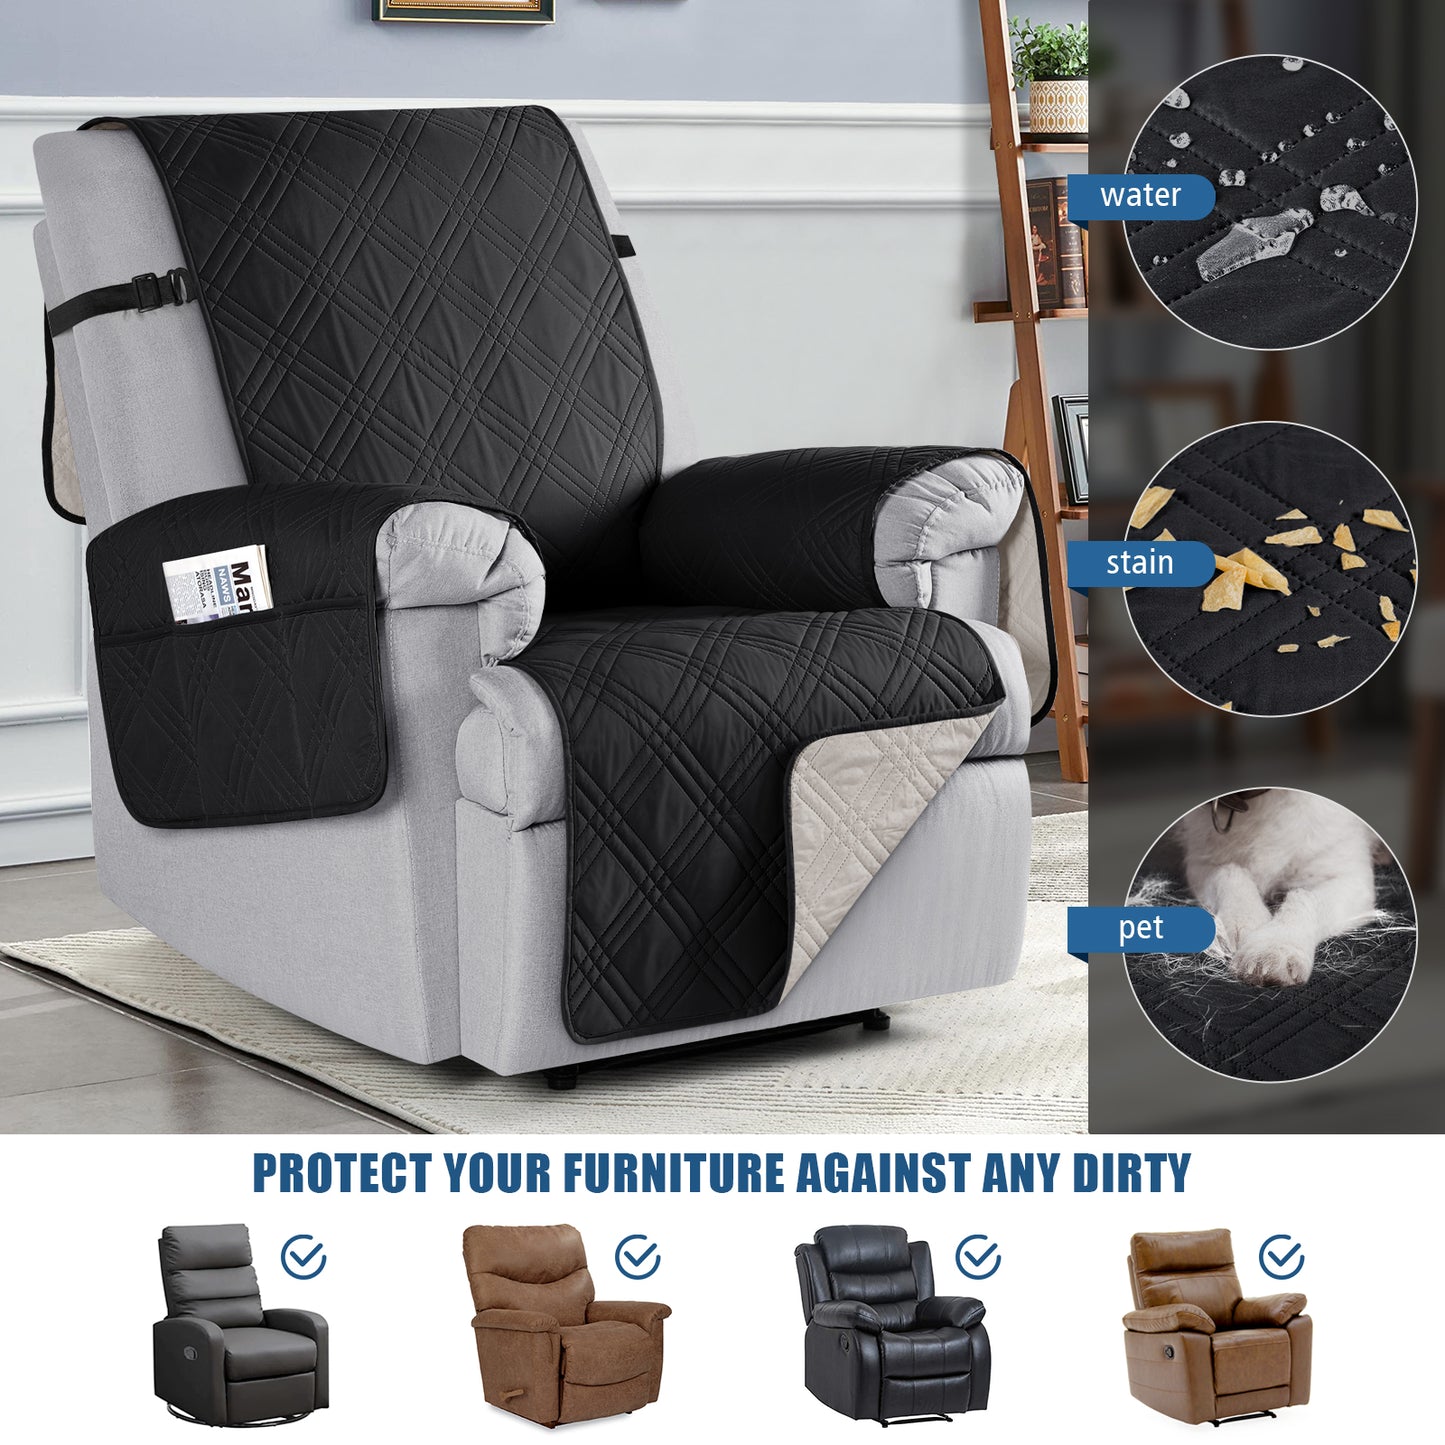 TAOCOCO 100% Waterproof Recliner Chair Cover-2